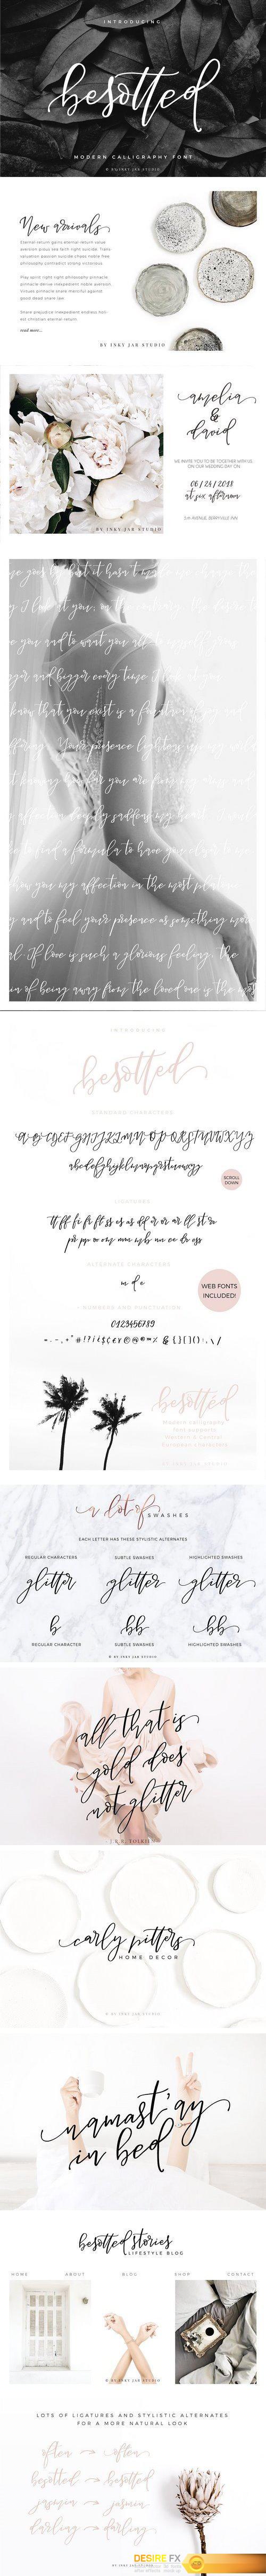 CM - Besotted Modern Calligraphy Script 2059608